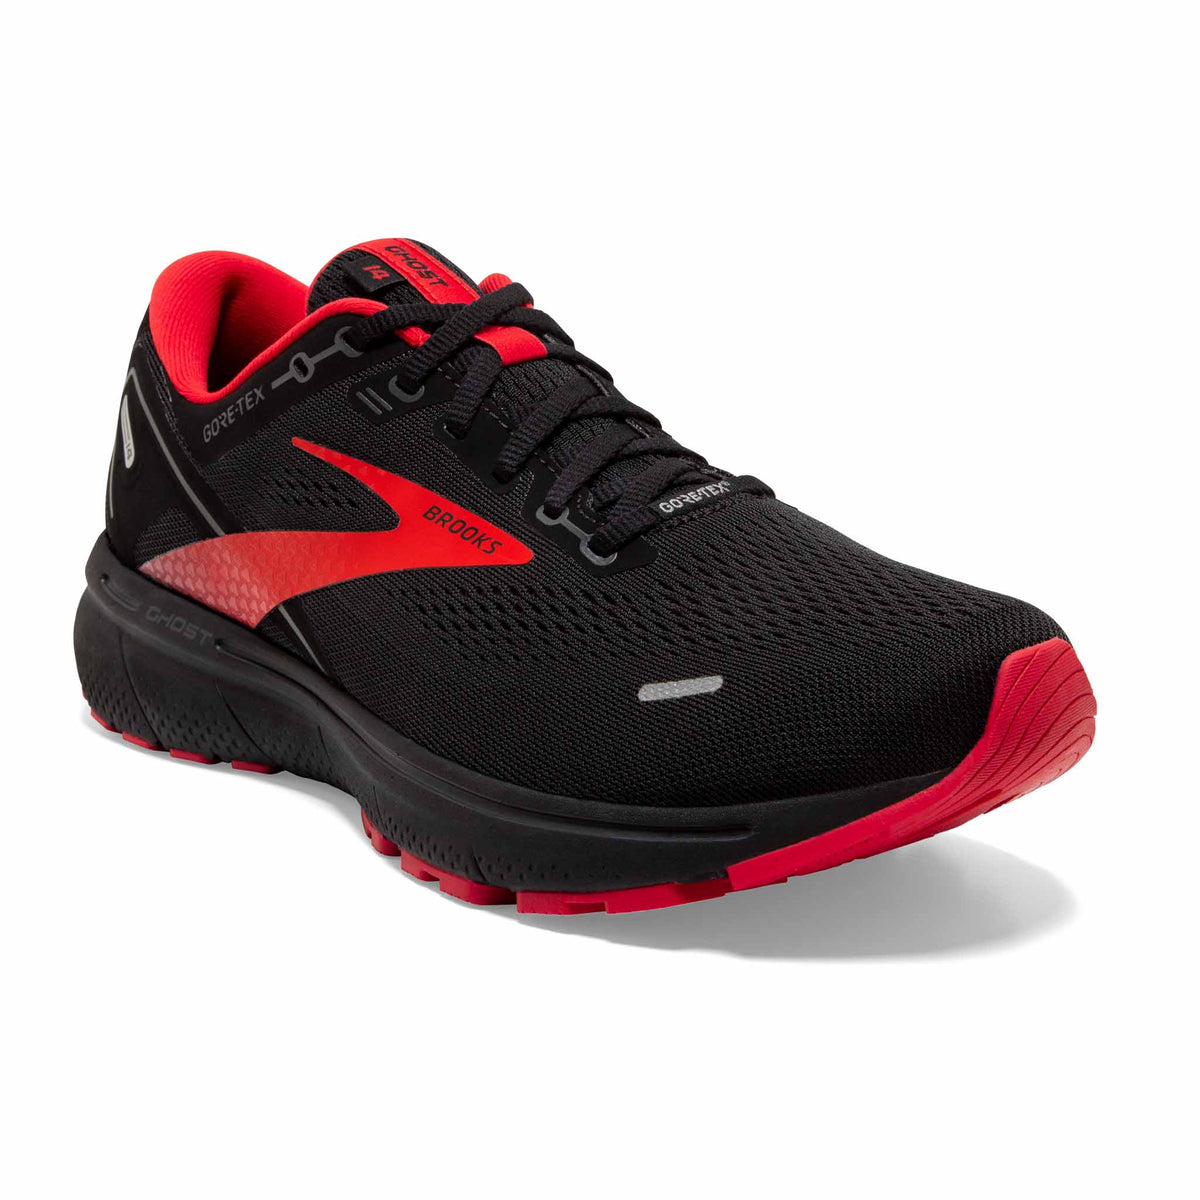 Brooks Ghost 14 GTX chaussures de course à pied pour homme - Black / Blackened Pearl / High Risk Red - angle